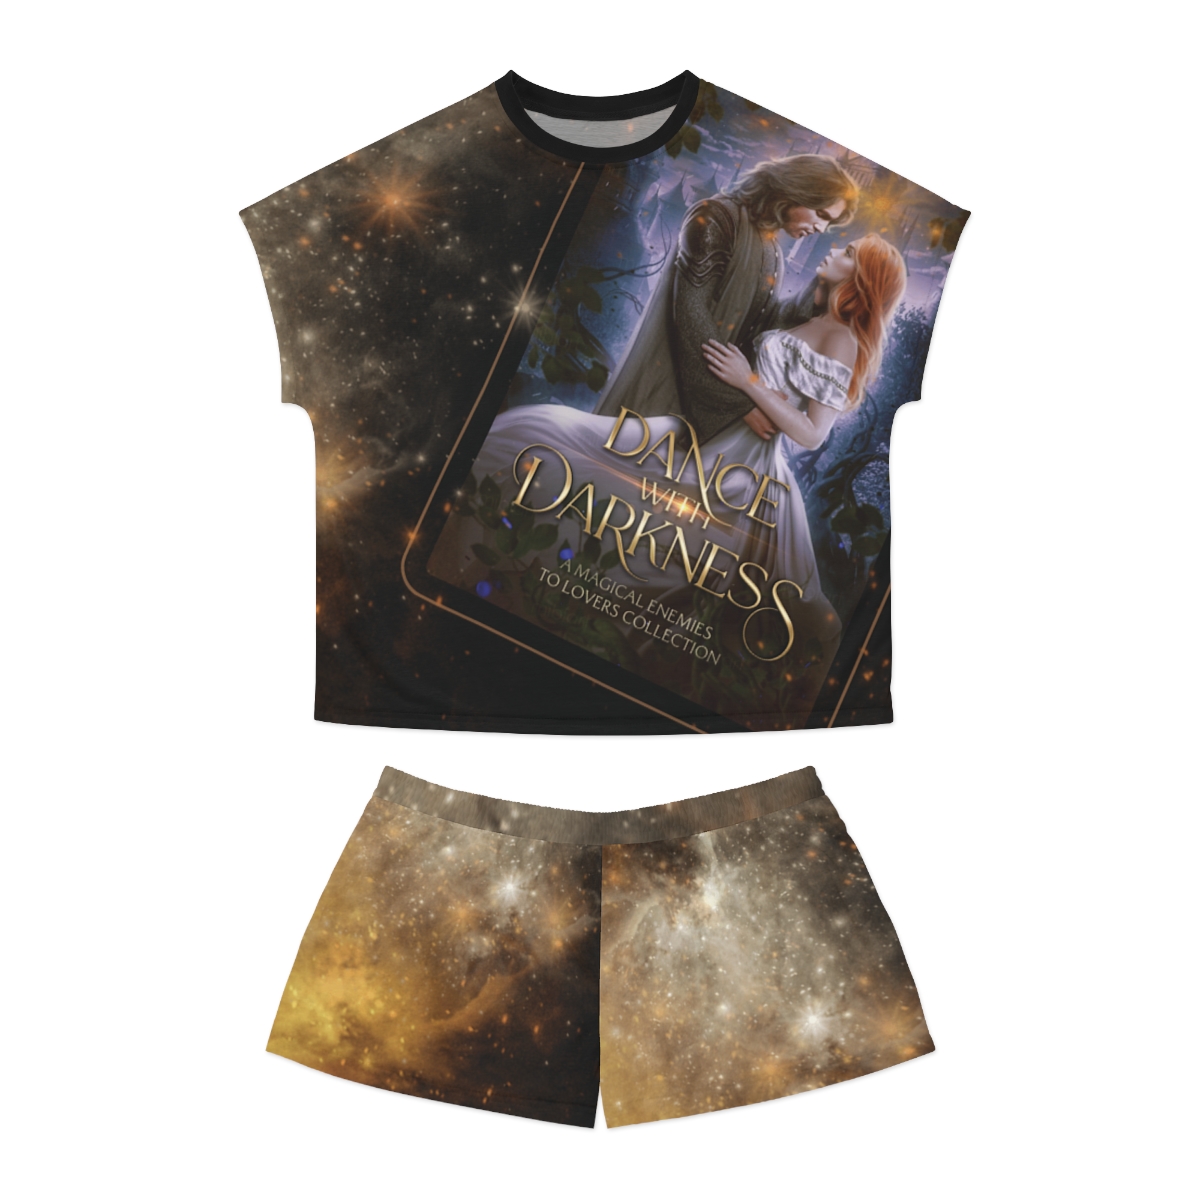  Women's Short Pajama Set - DANCE WITH DARKNESS product thumbnail image